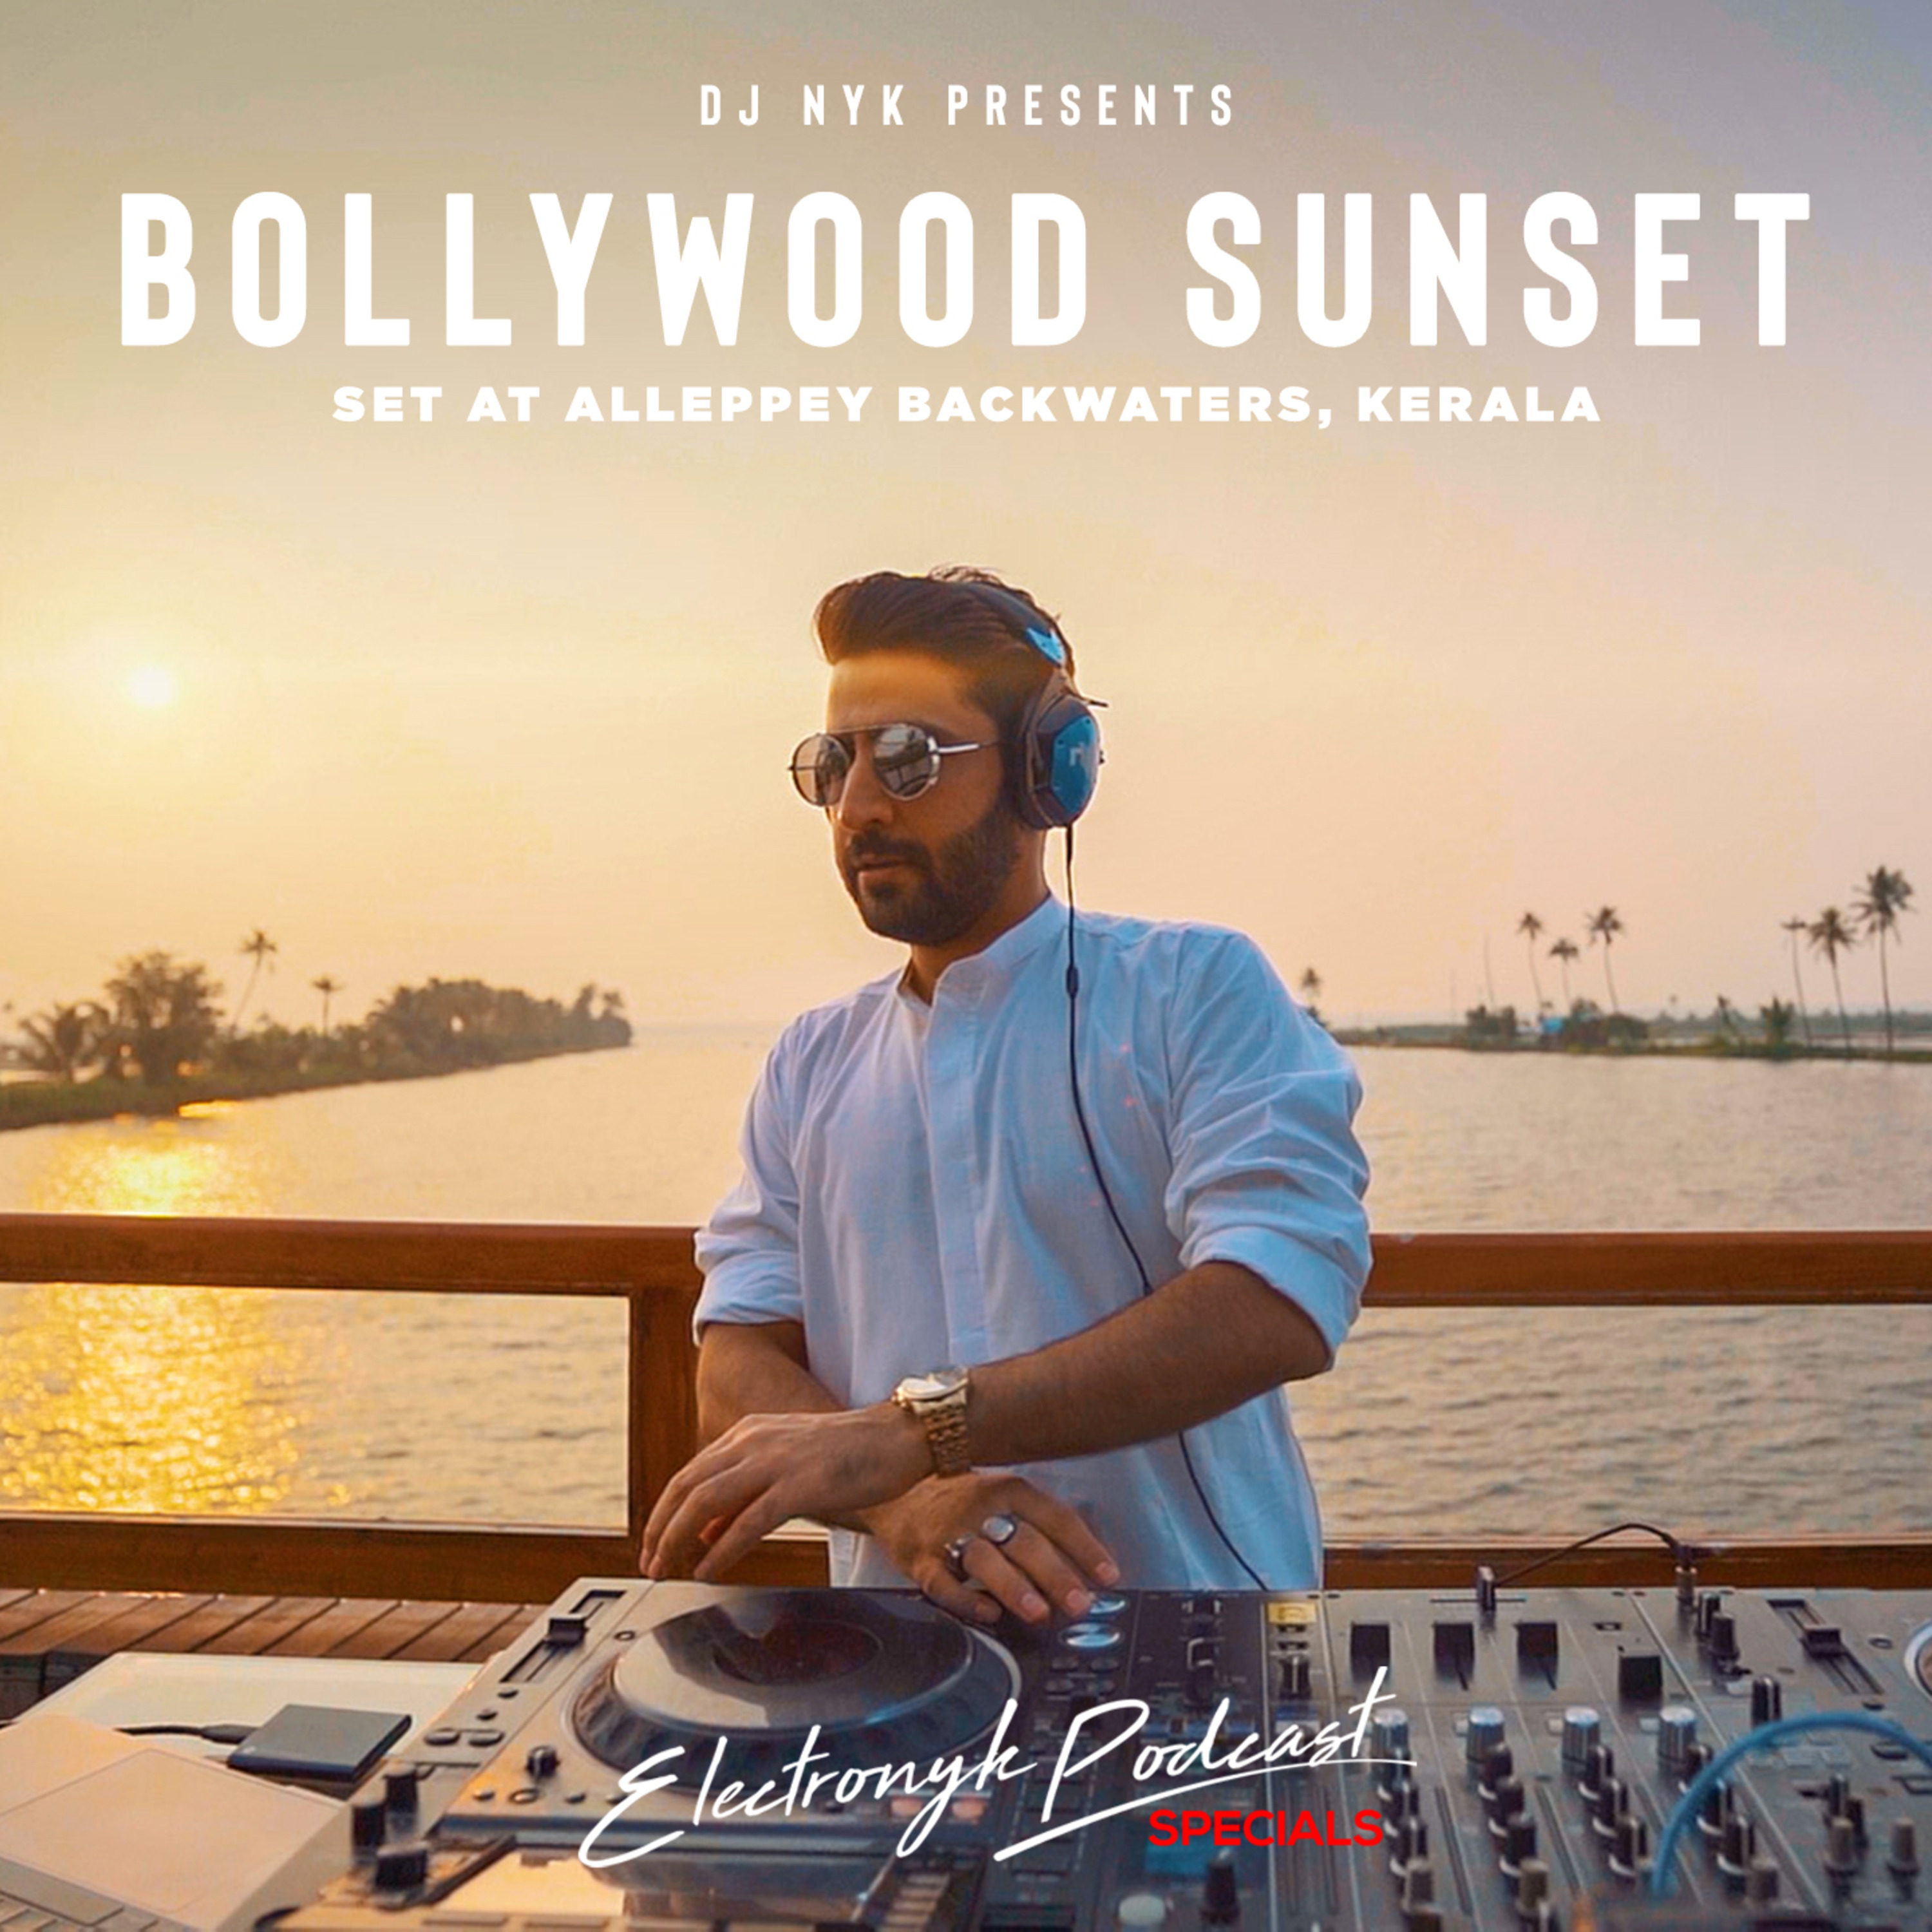 DJ NYK - Bollywood Sunset Set at Alleppey Backwaters (Kerala) | Electronyk Podcast Specials